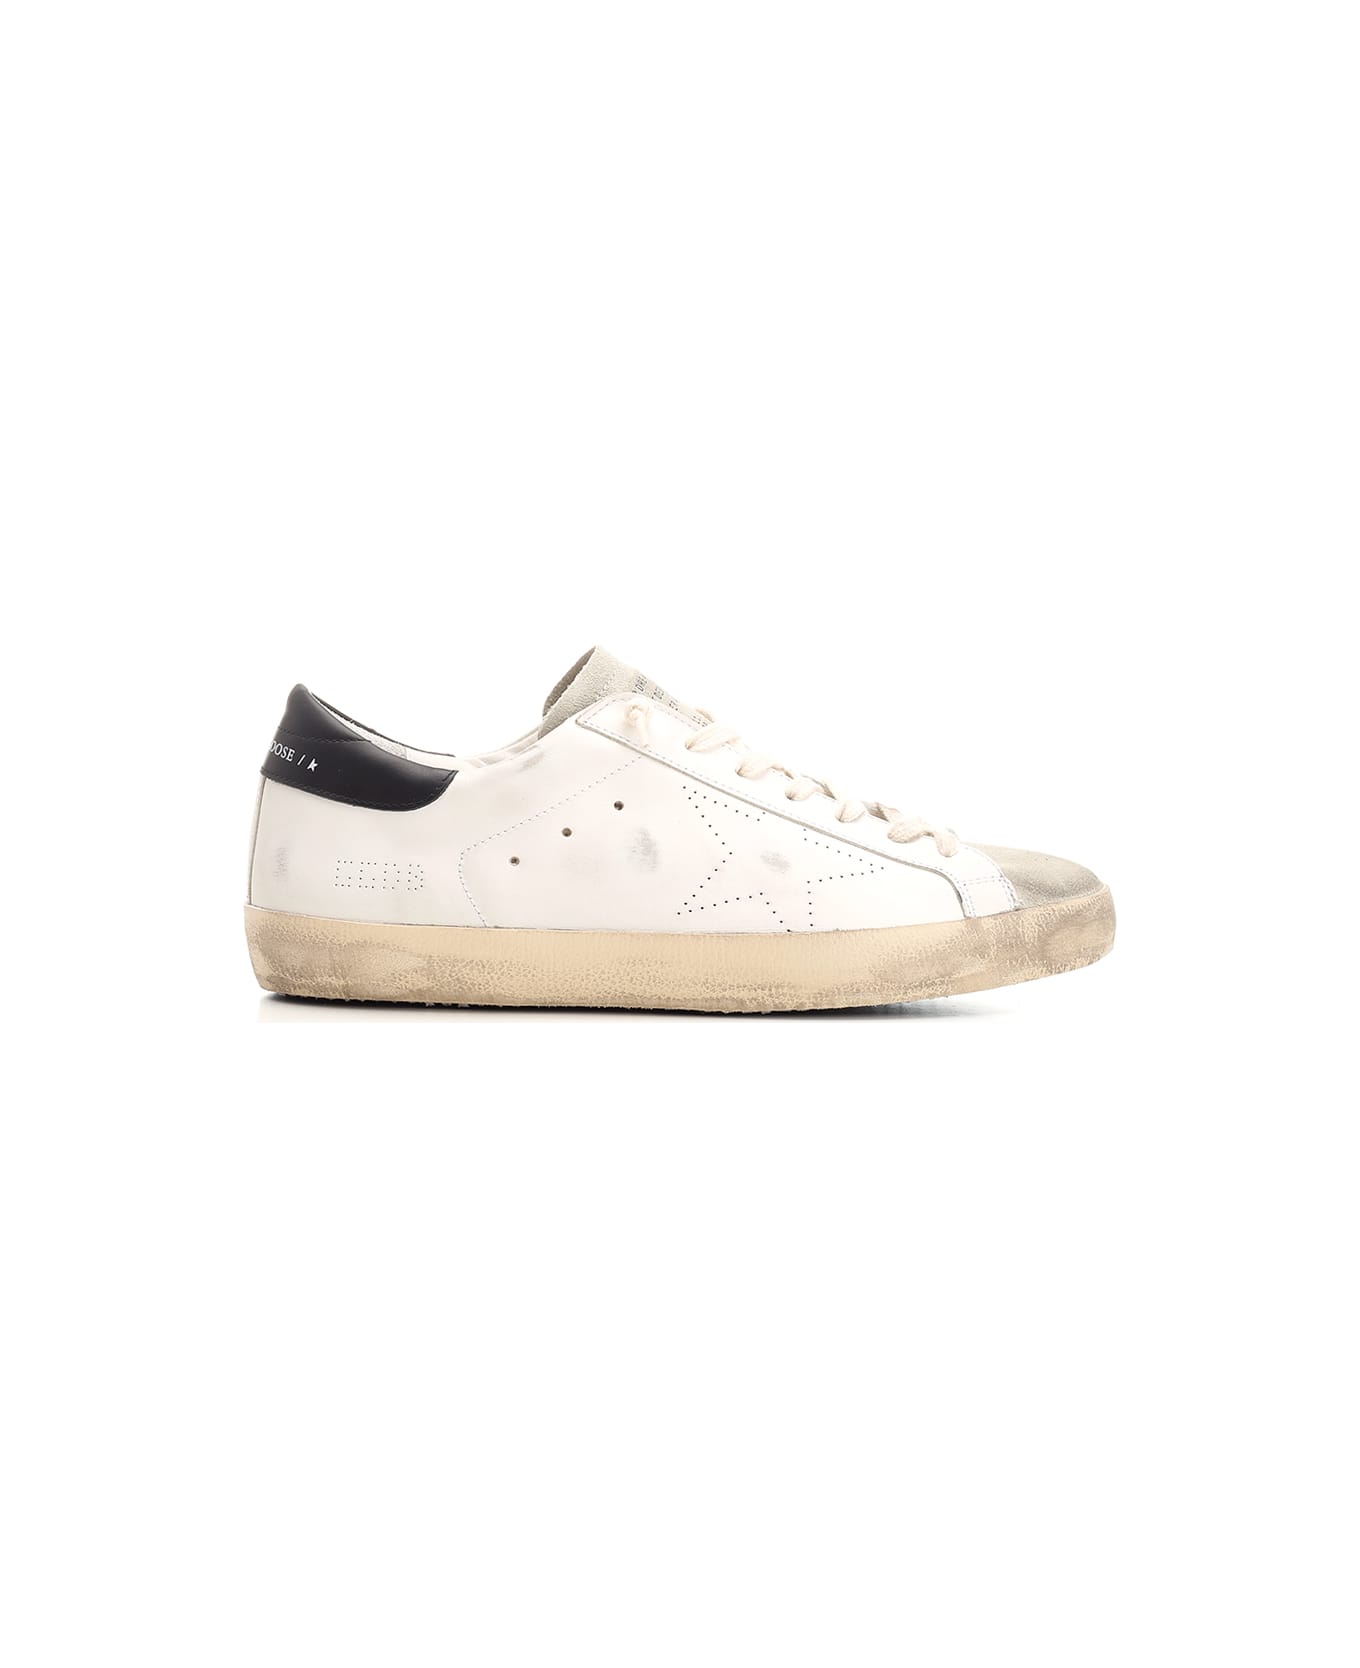 Golden Goose Super-star Leather Low-top Sneakers - White/Ice/Black スニーカー